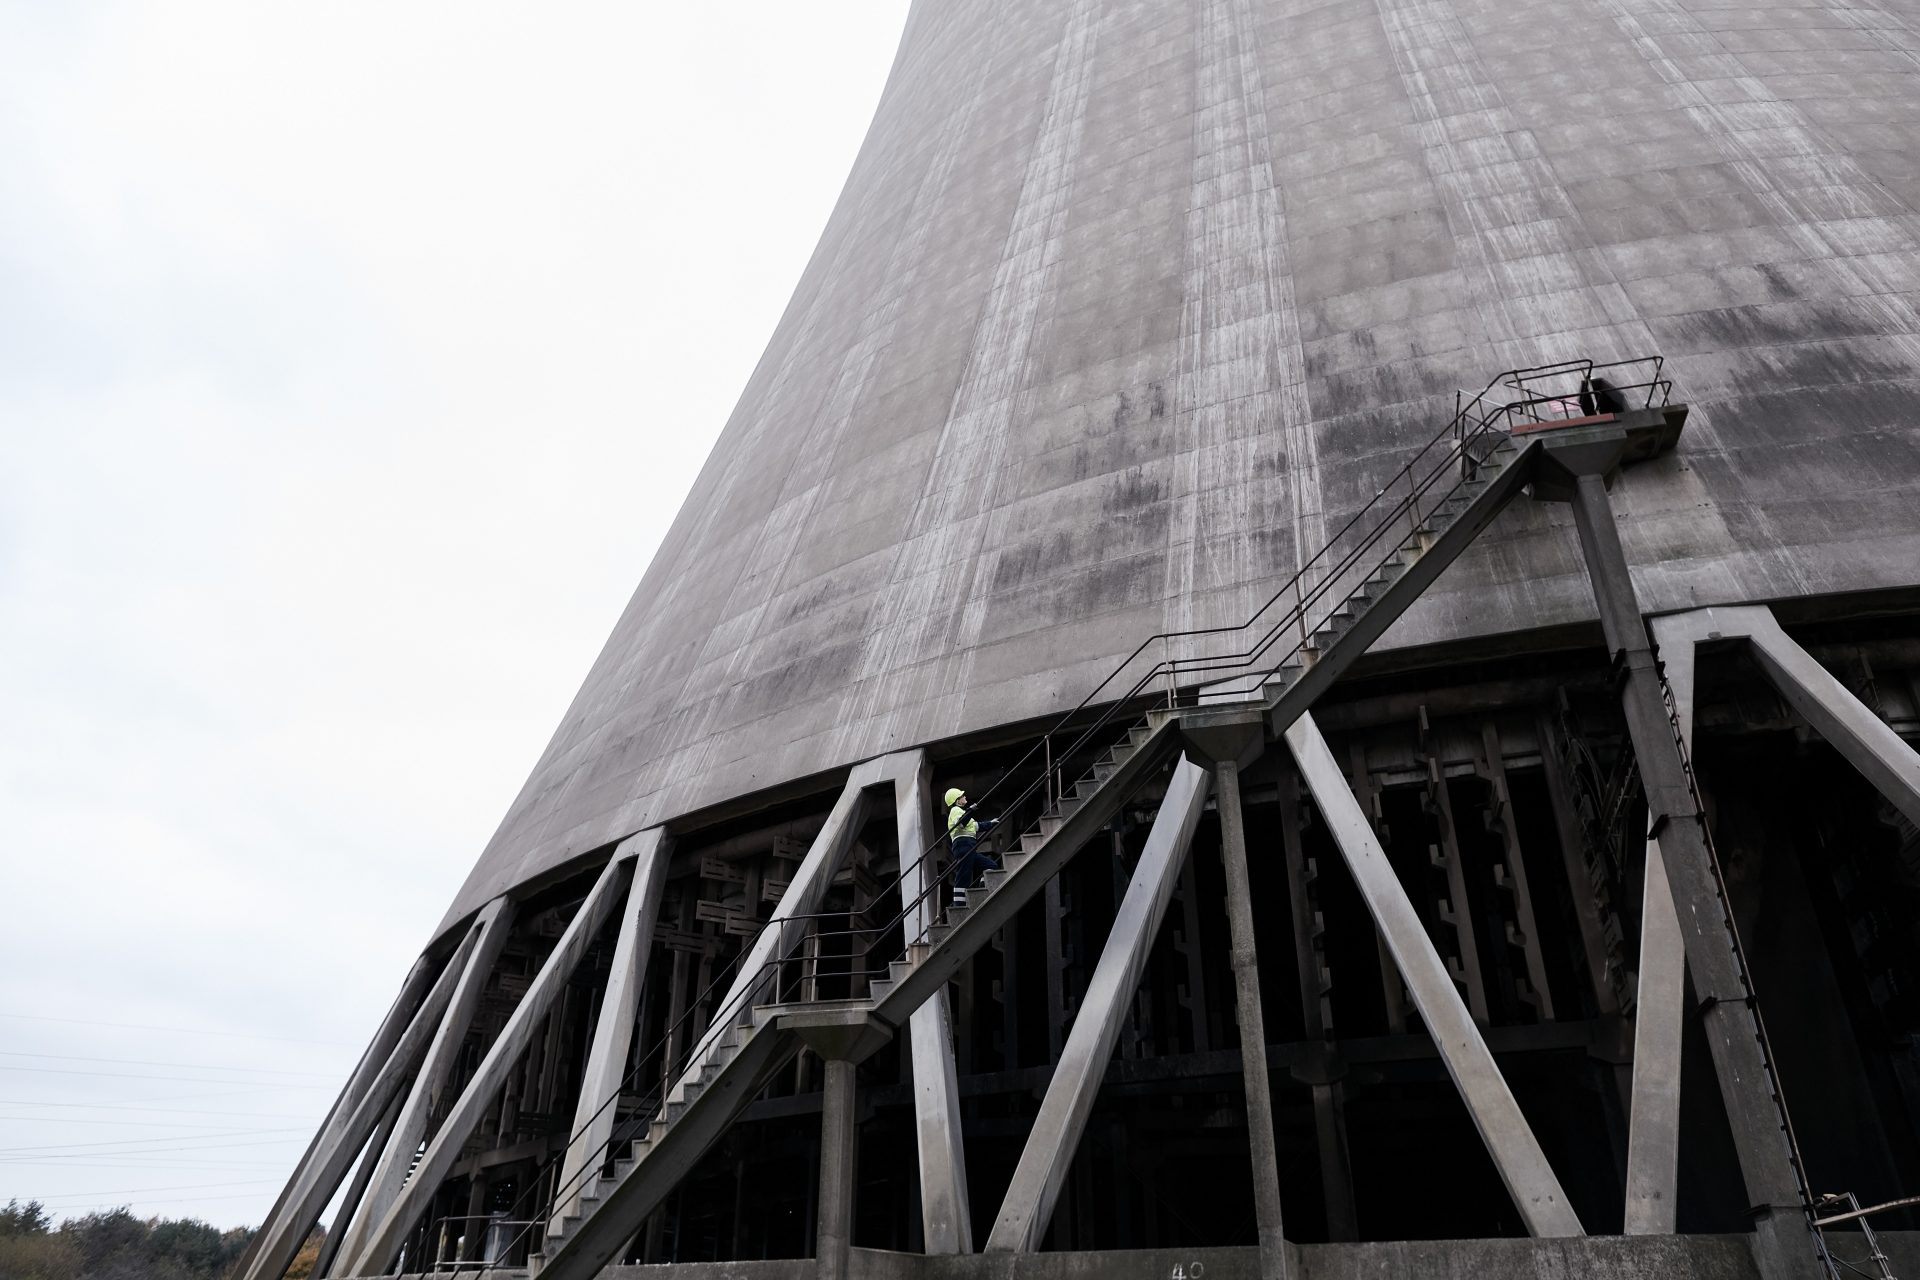 Engineer climbs cooling tower at Drax Power Station